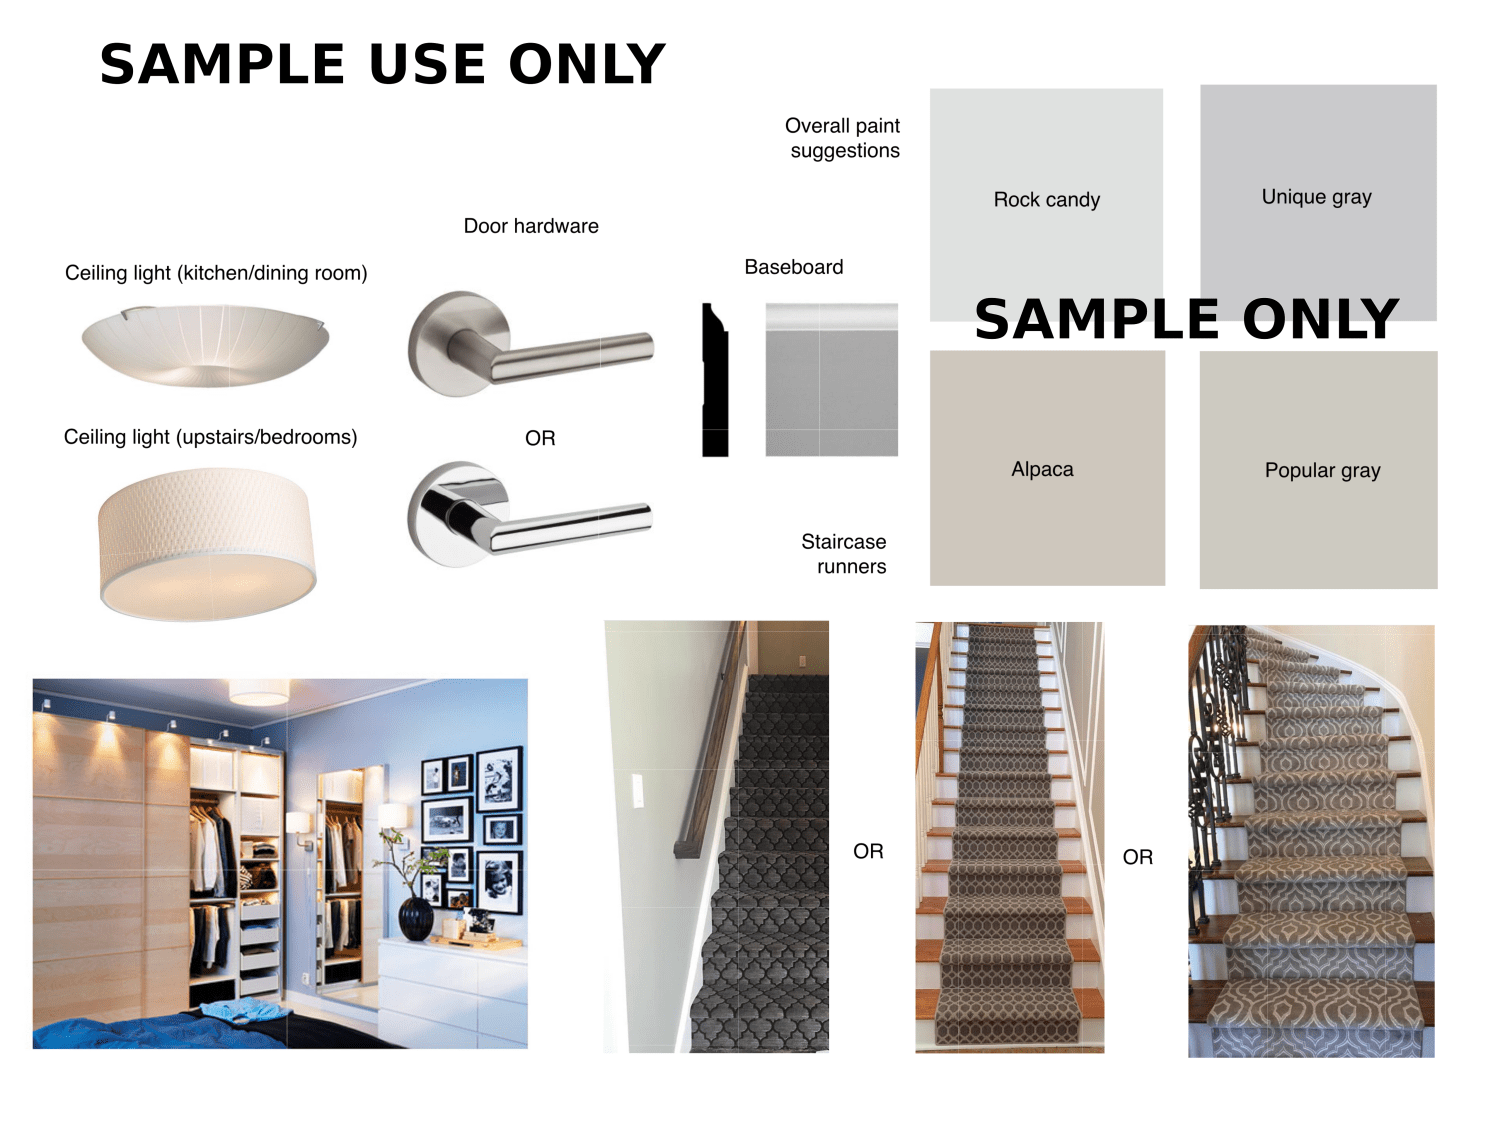 Overall Mood Board, Jersey City Heights Home Remodel